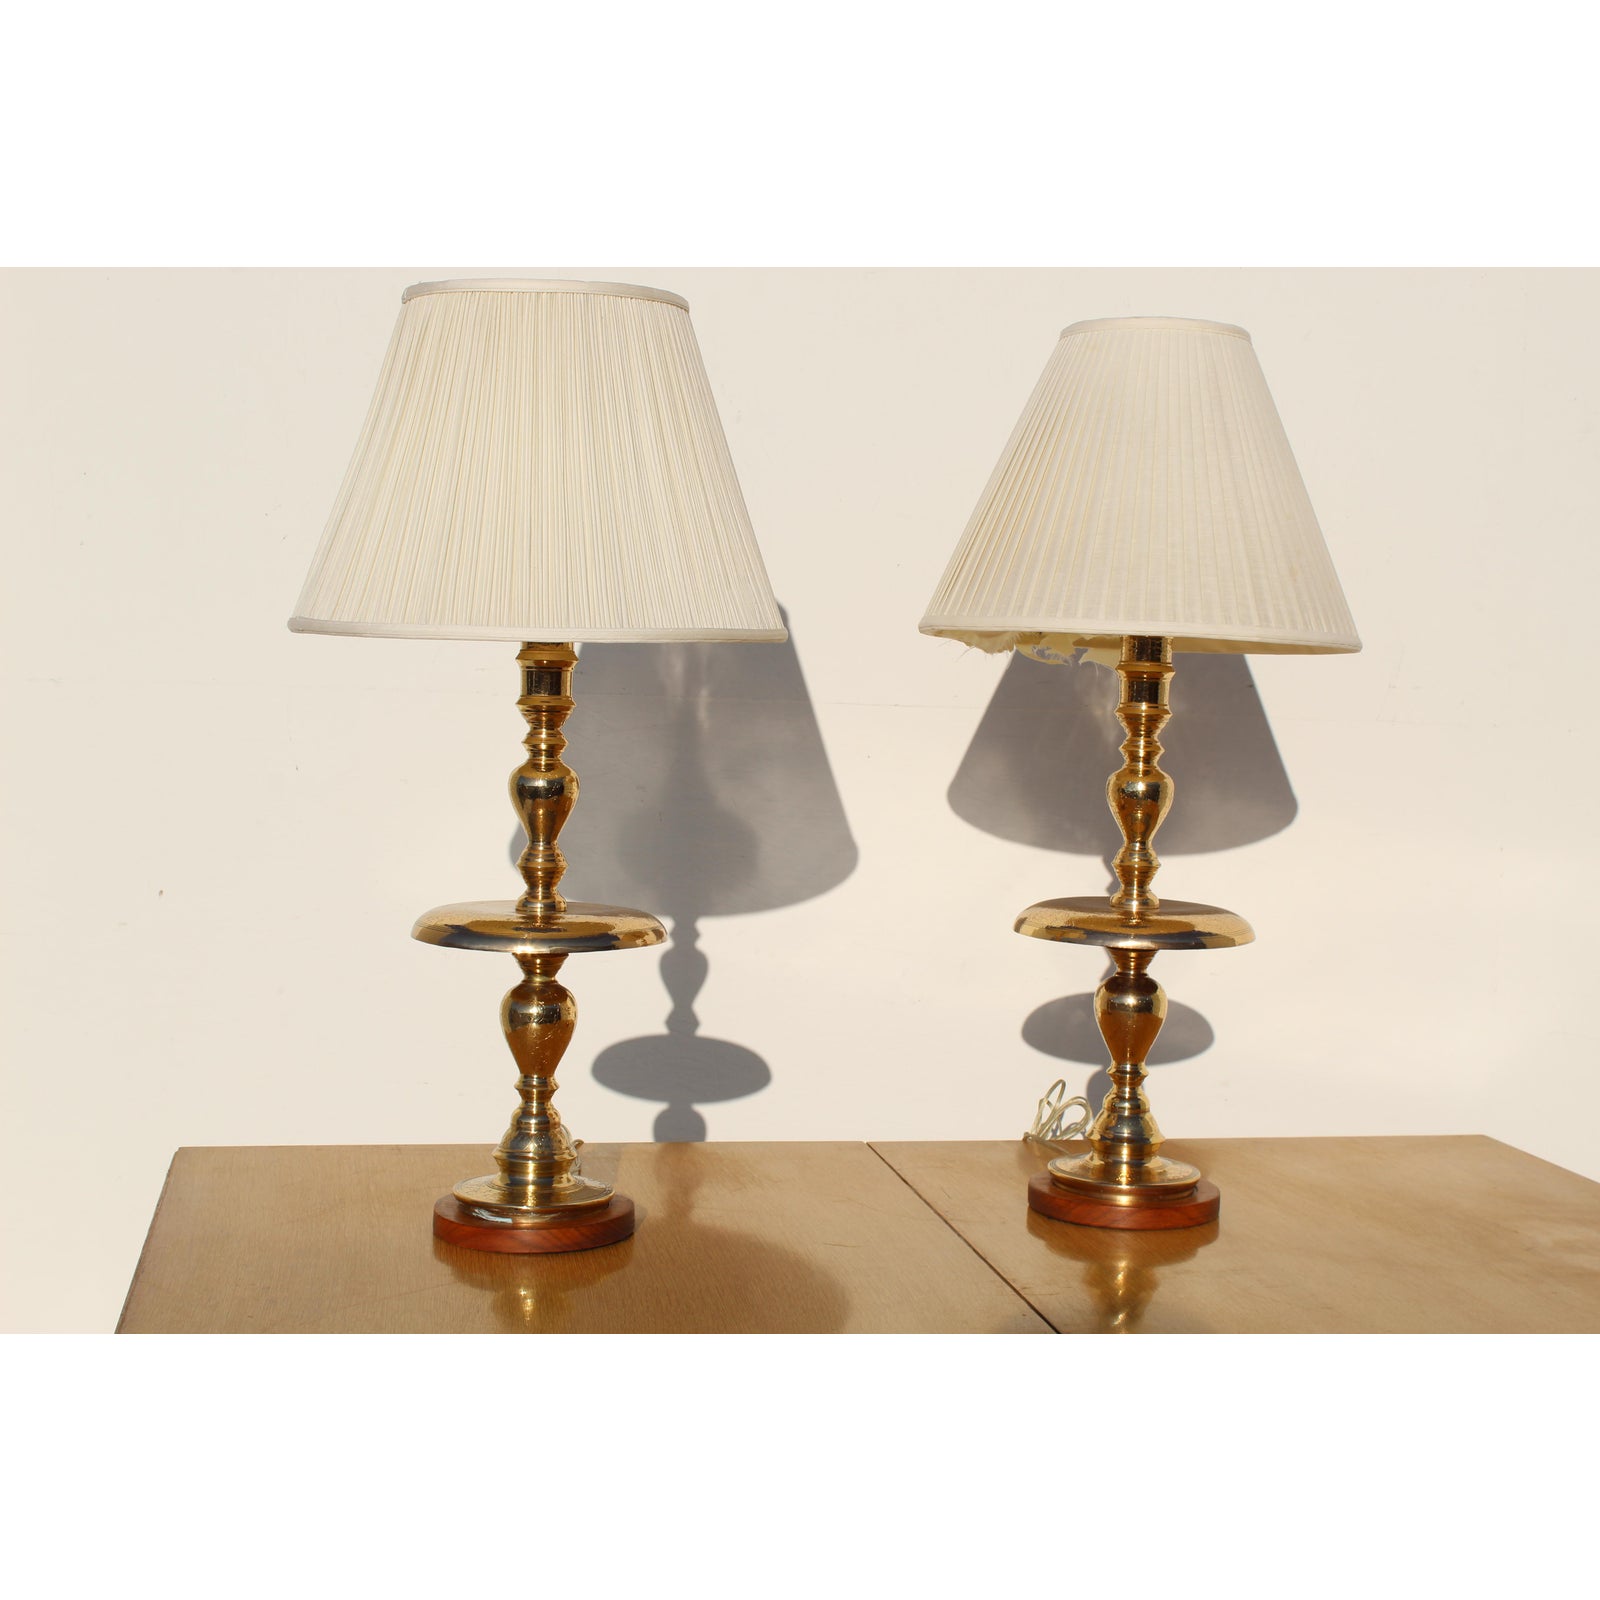 1960s-hollywood-regency-lamps-with-shades-a-pair-1314